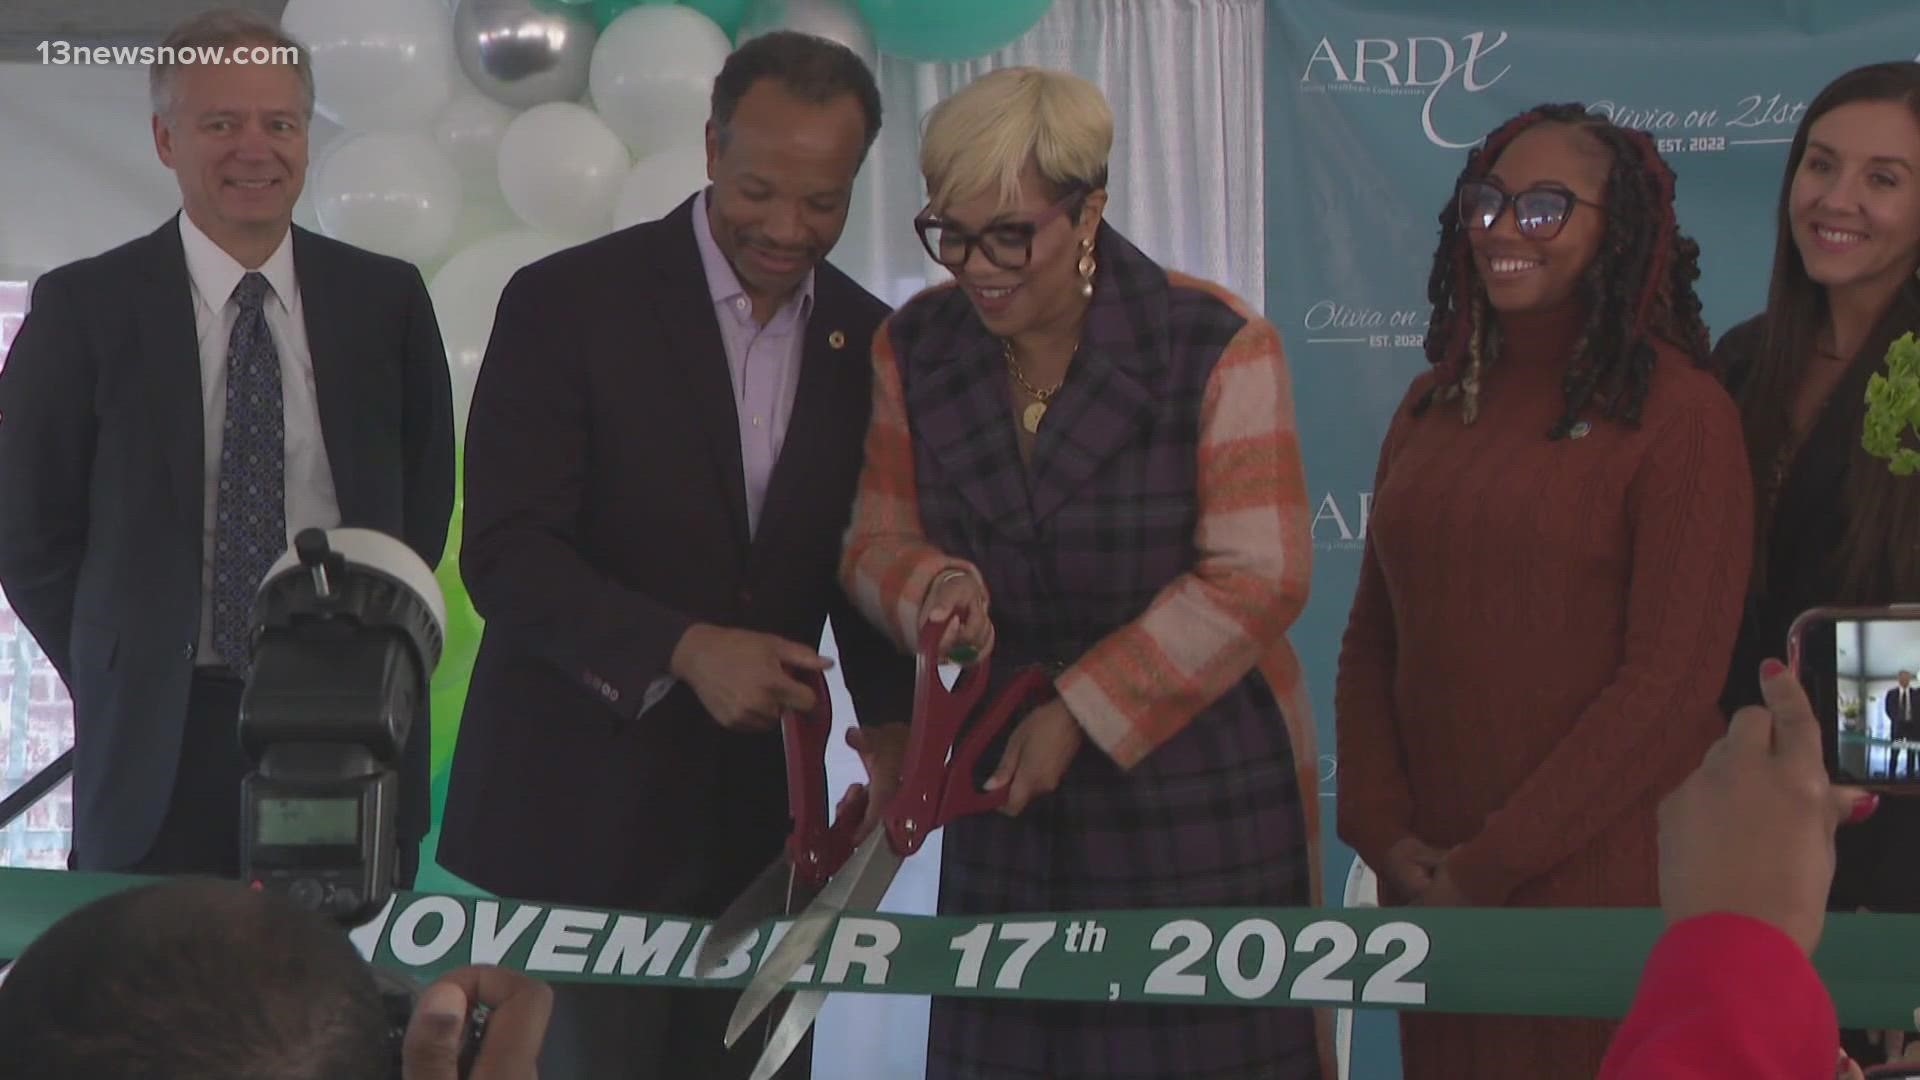 Dr. Angela Reddix, the founder and CEO of ARDX, said this healthcare equity company would honor her grandmother, who worked across the street.